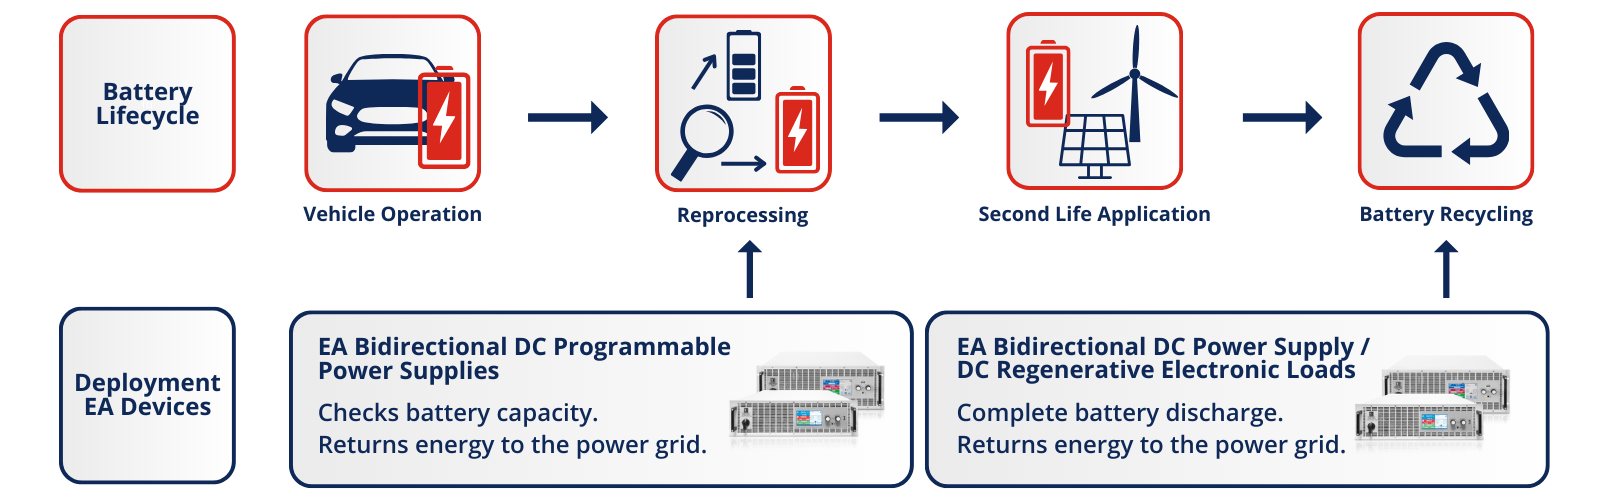 Battery Life Cycle and EA Deployment Devices